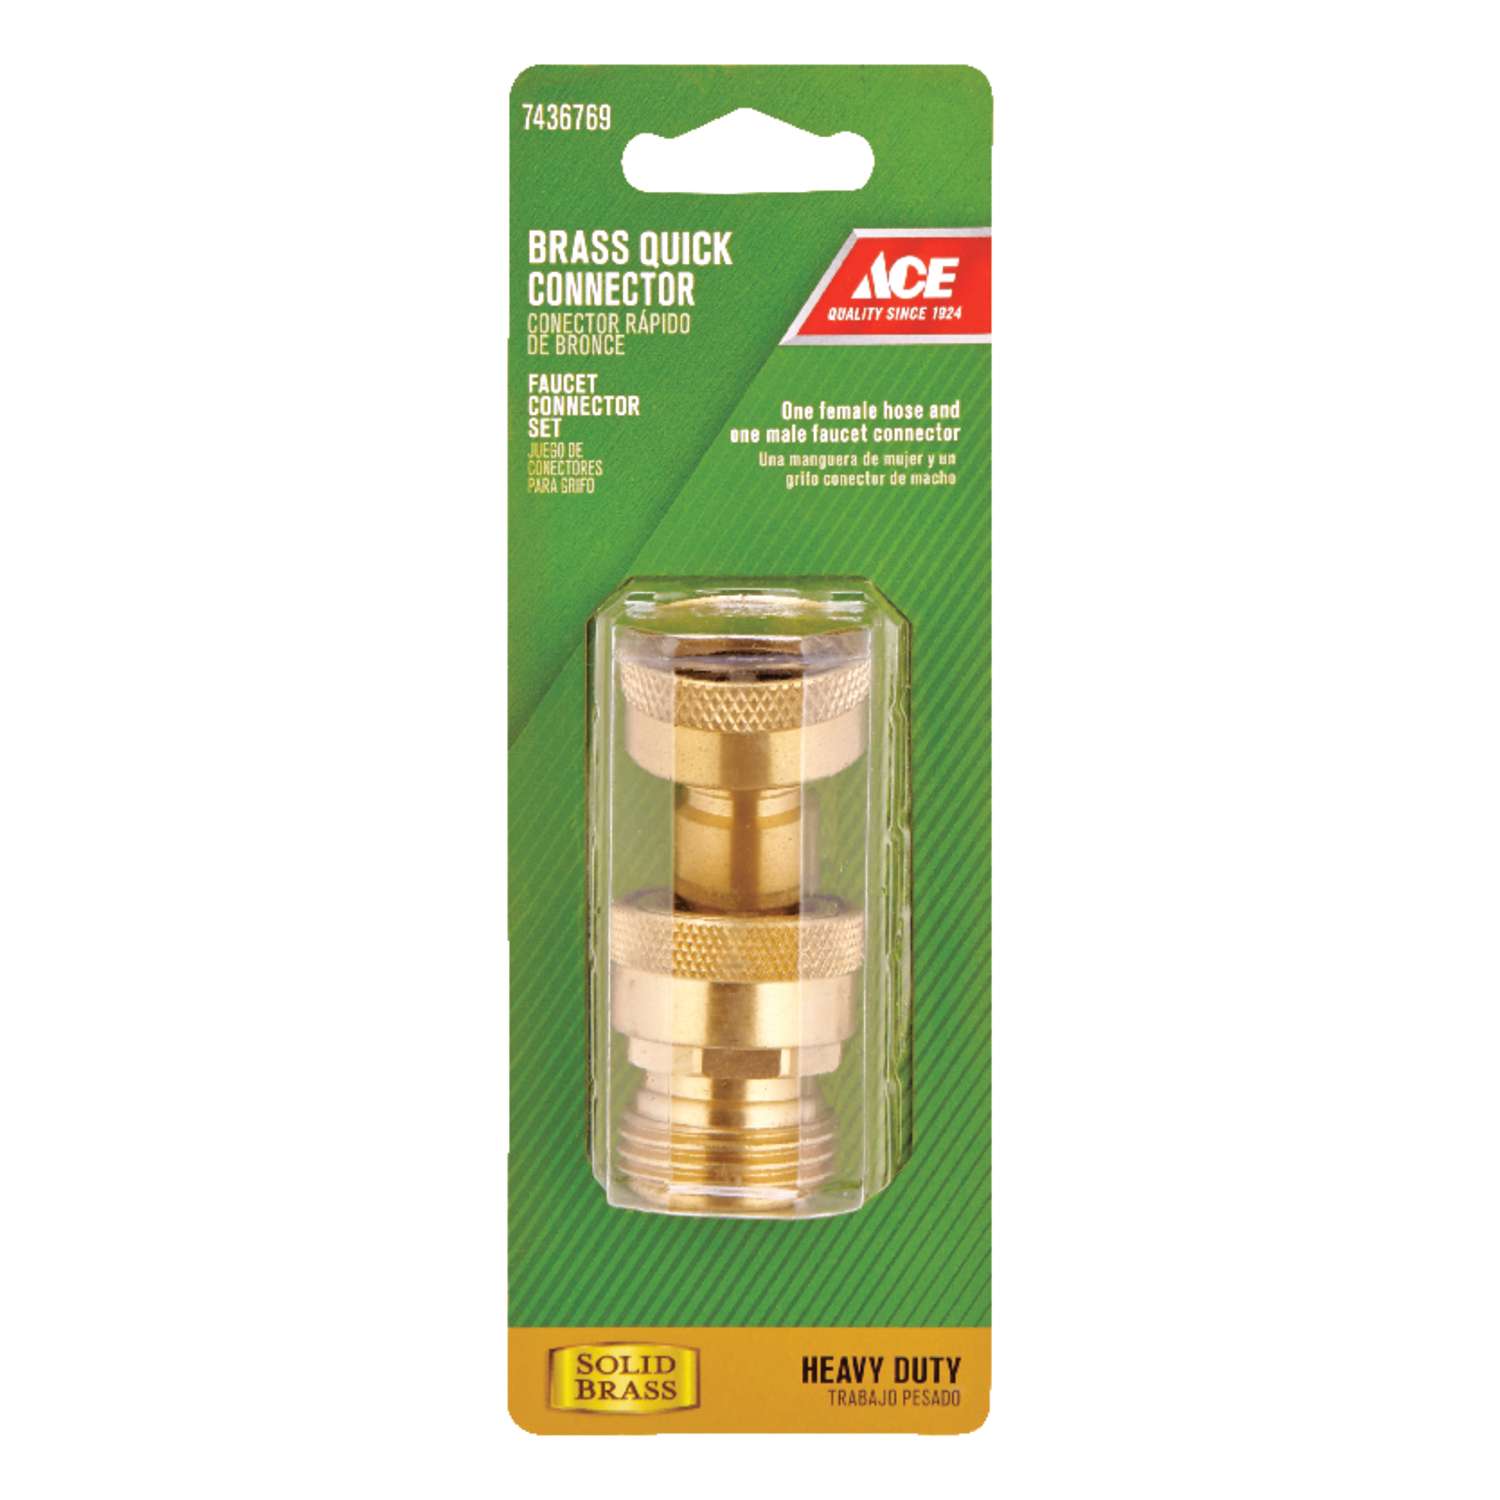 Green Blade Branded 1/2" Quick Fix Female Hose Adaptor With Water Stop 